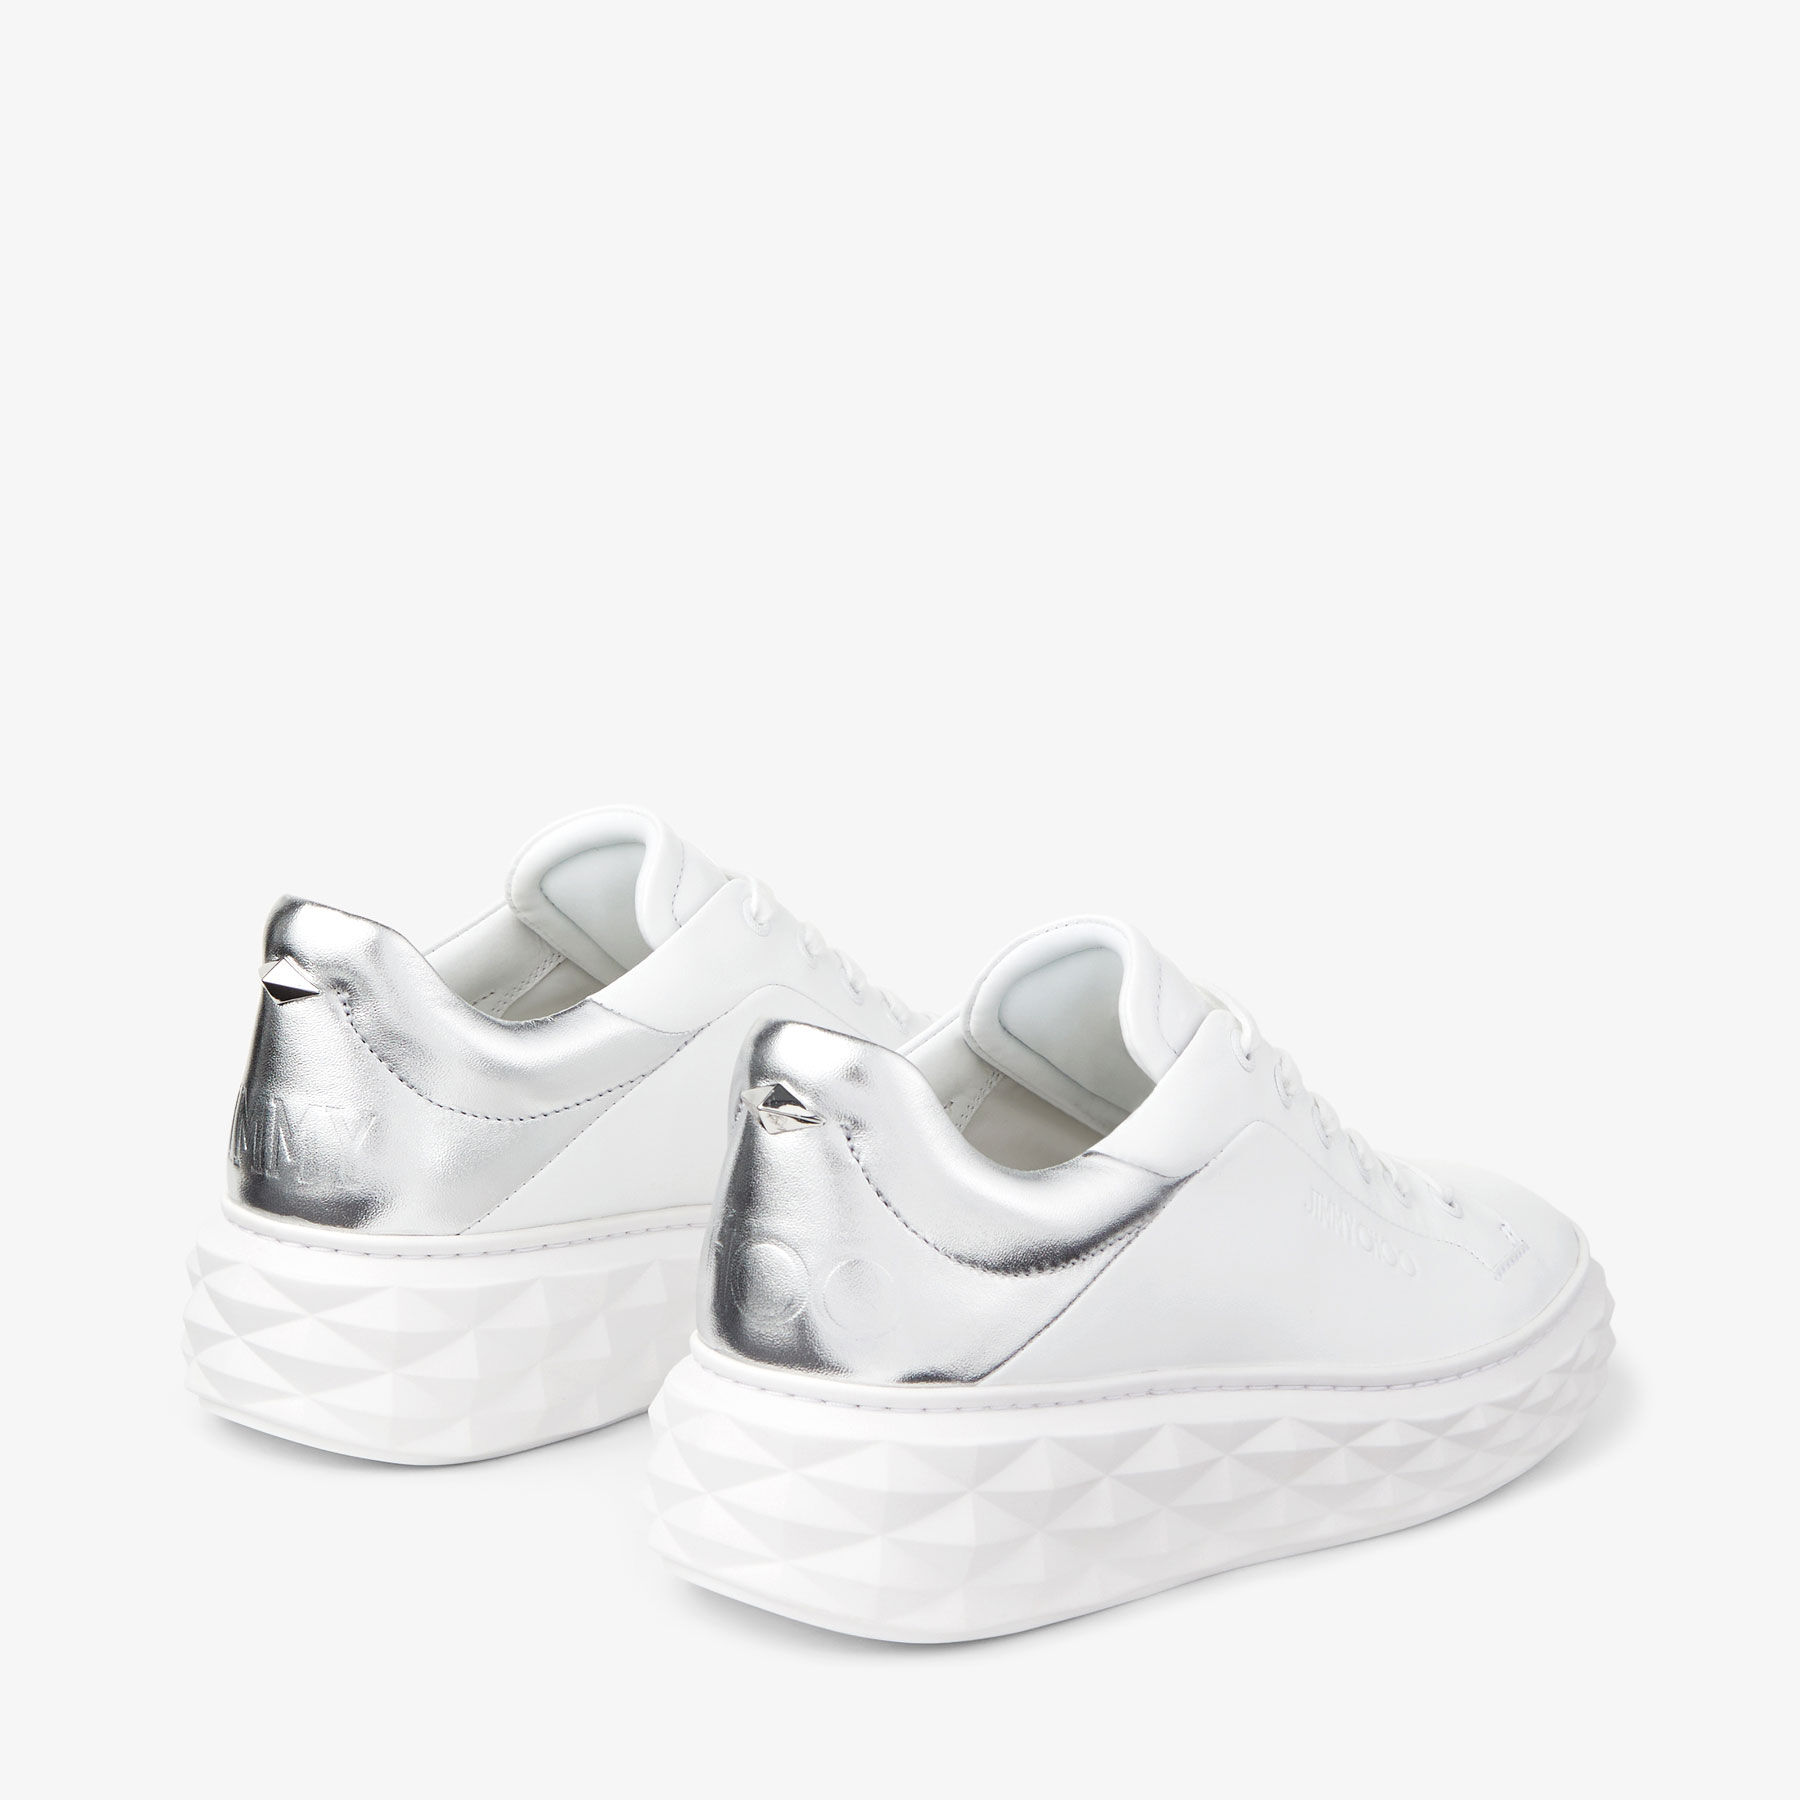 Diamond Maxi/F Ii | White and Silver Leather Trainers with Platform ...